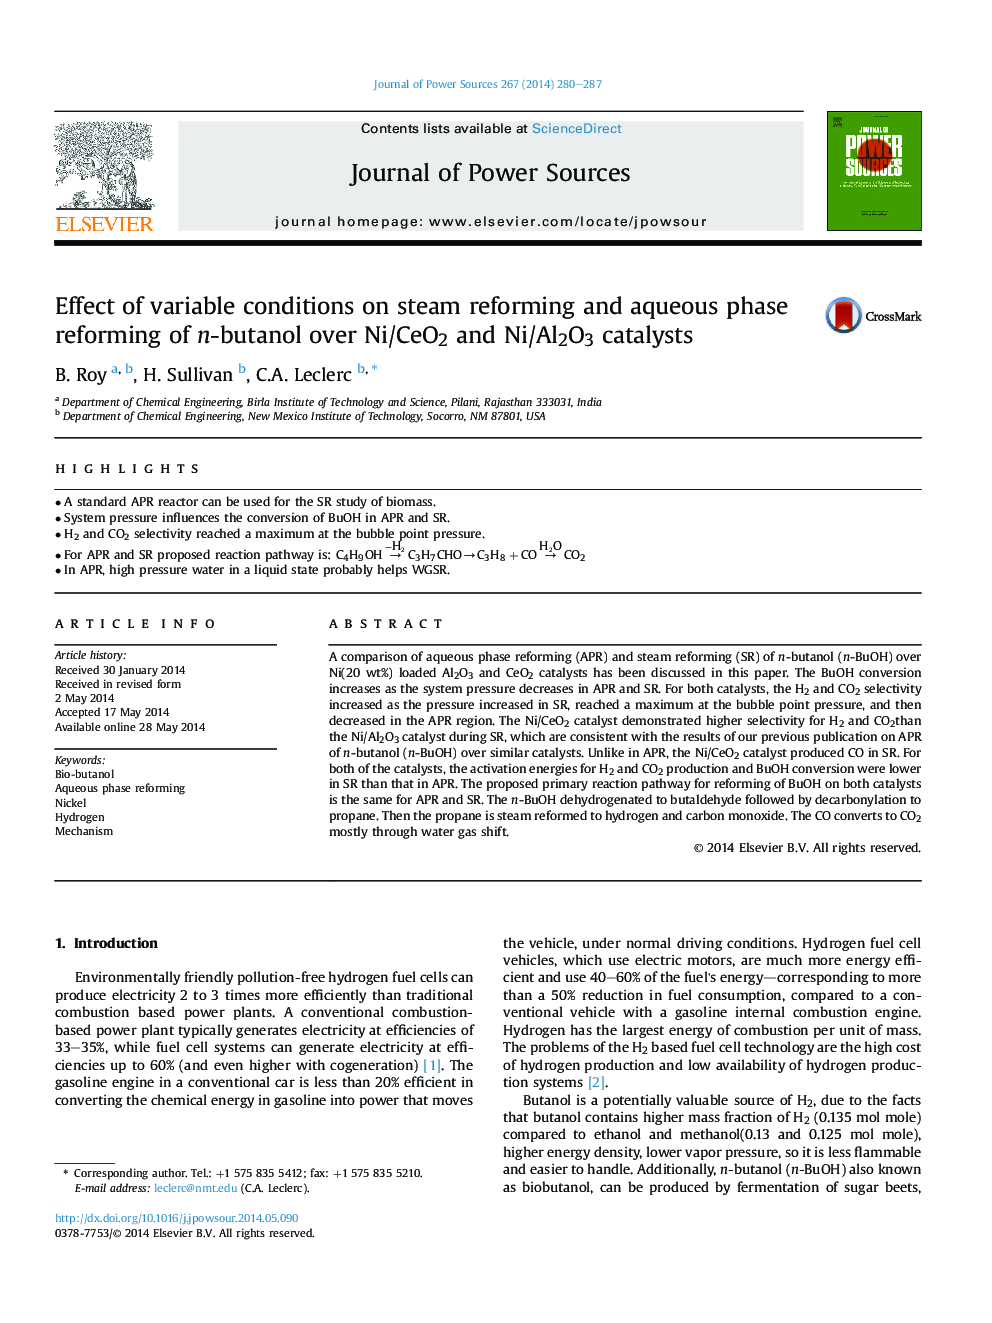 Effect of variable conditions on steam reforming and aqueous phase reforming of n-butanol over Ni/CeO2 and Ni/Al2O3 catalysts